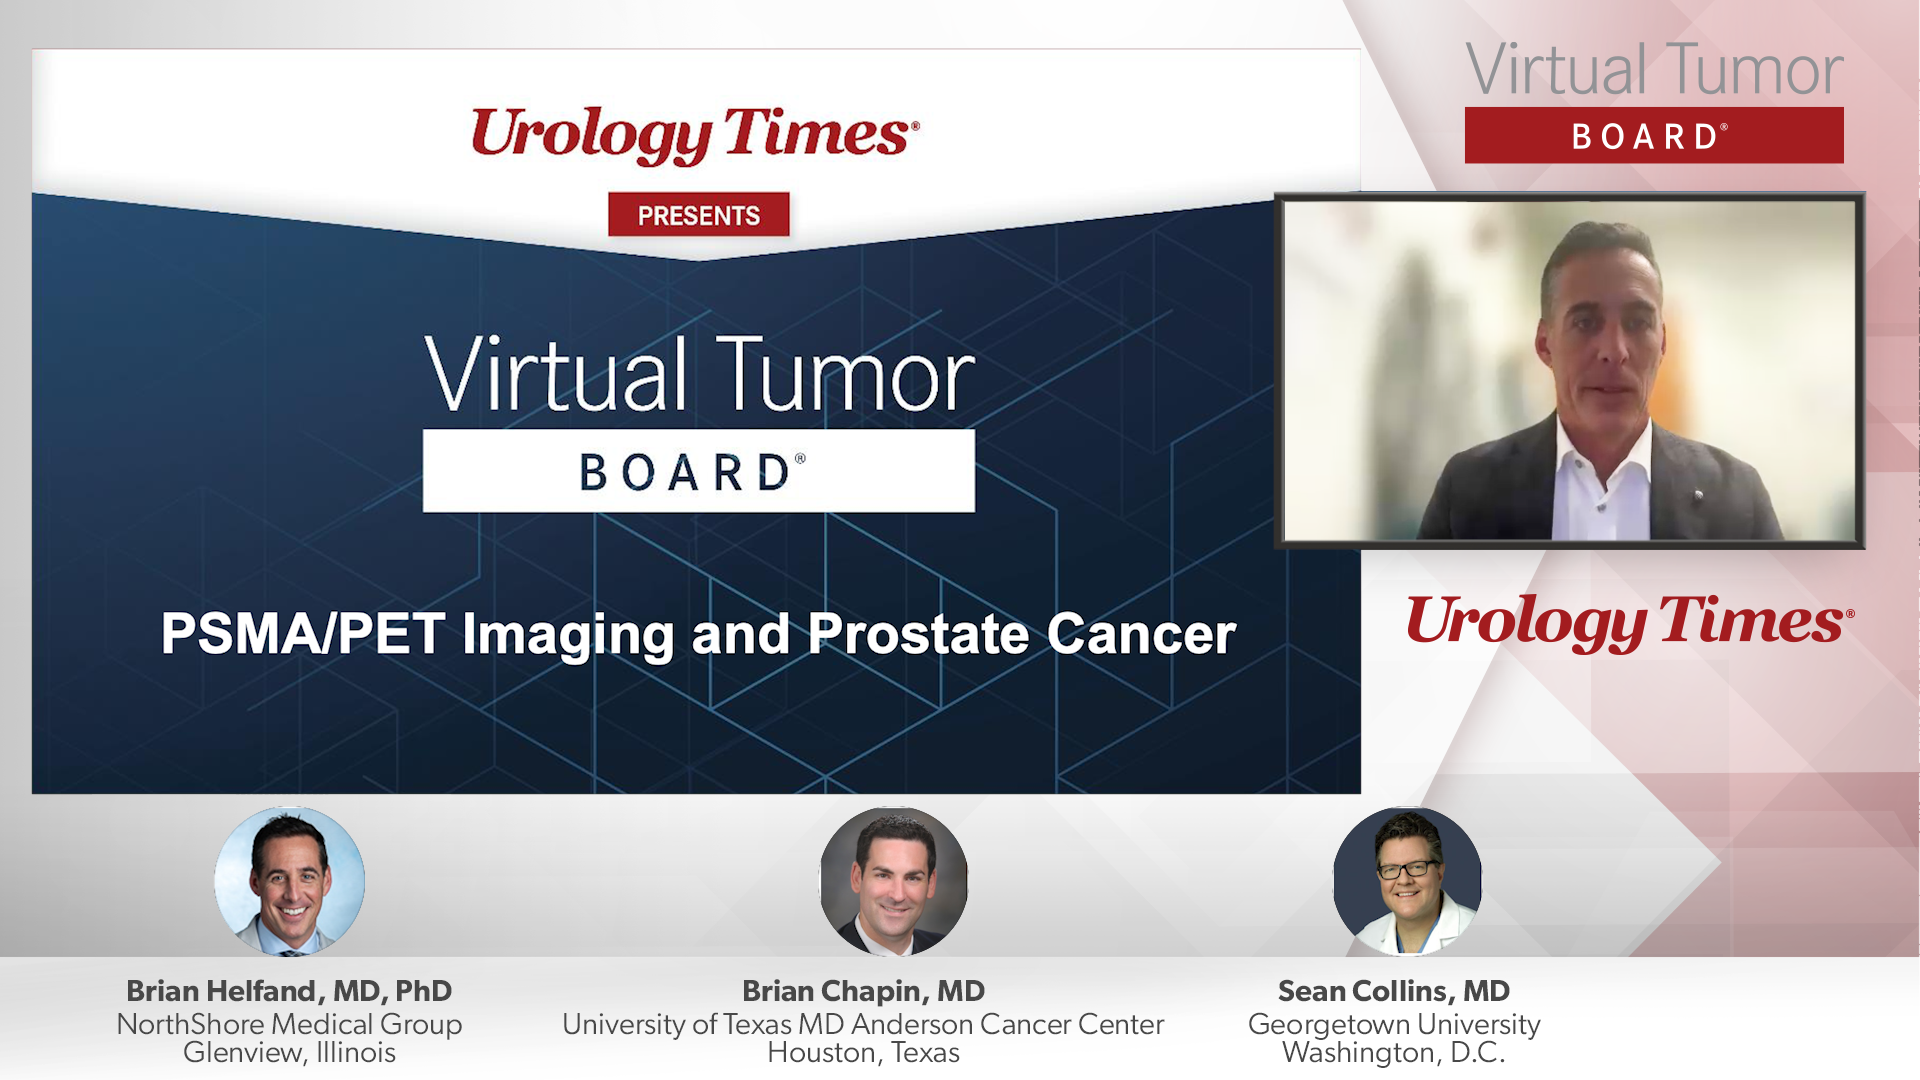 Patient Profile 1: A 51-Year-Old Man with High-Risk Localized Prostate Cancer